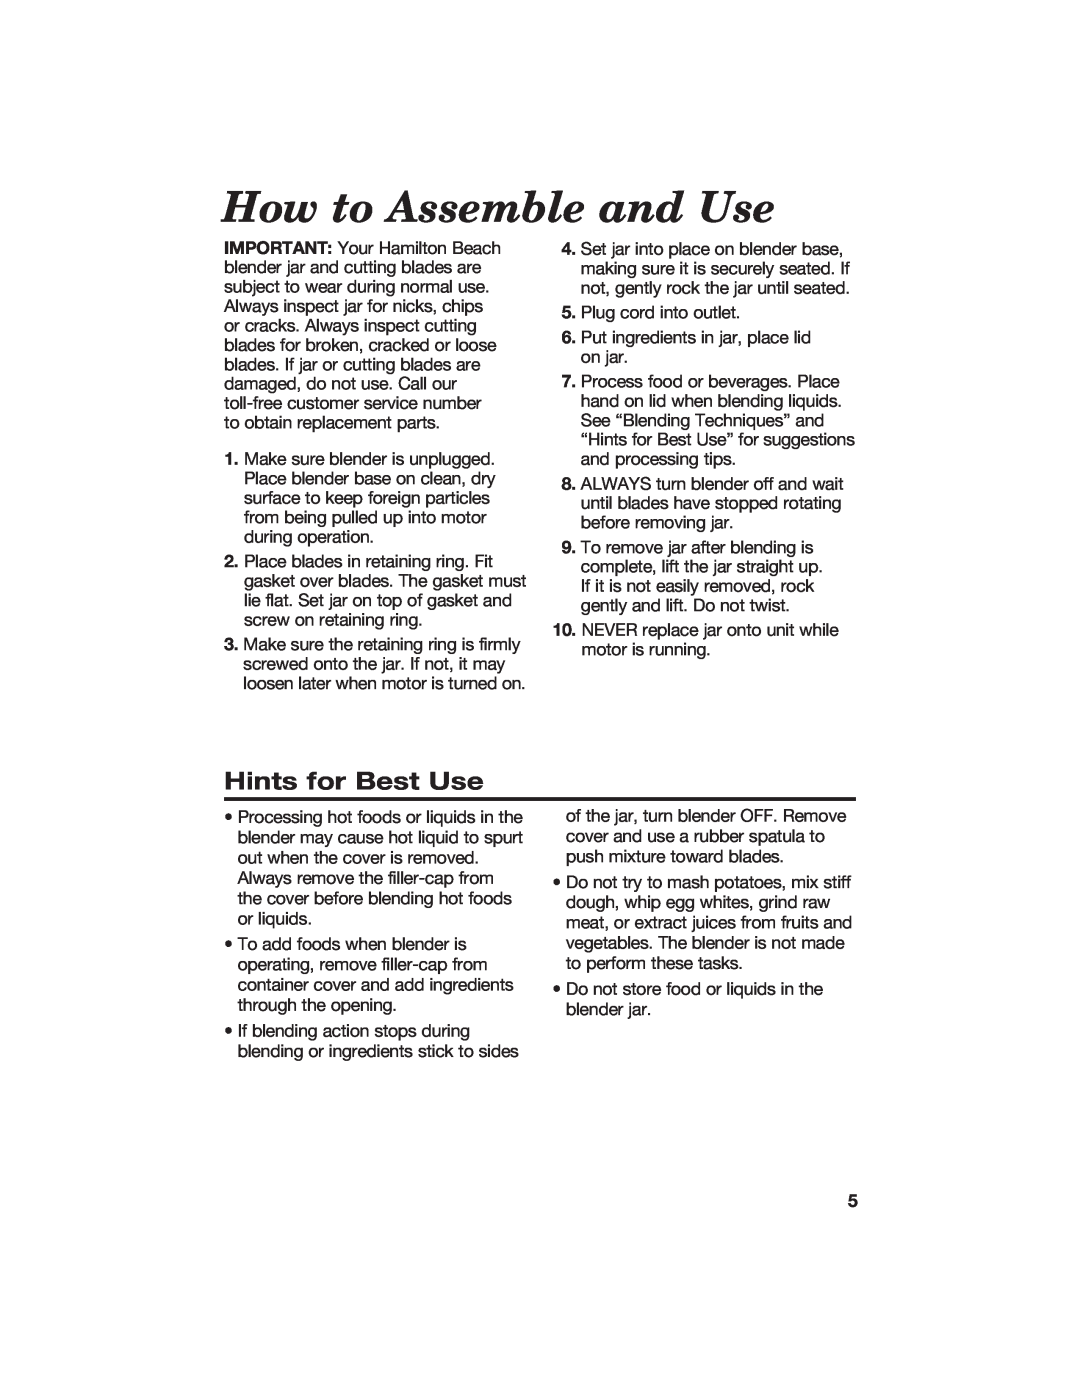 Hamilton Beach 840071000 manual How to Assemble and Use, Hints for Best Use 